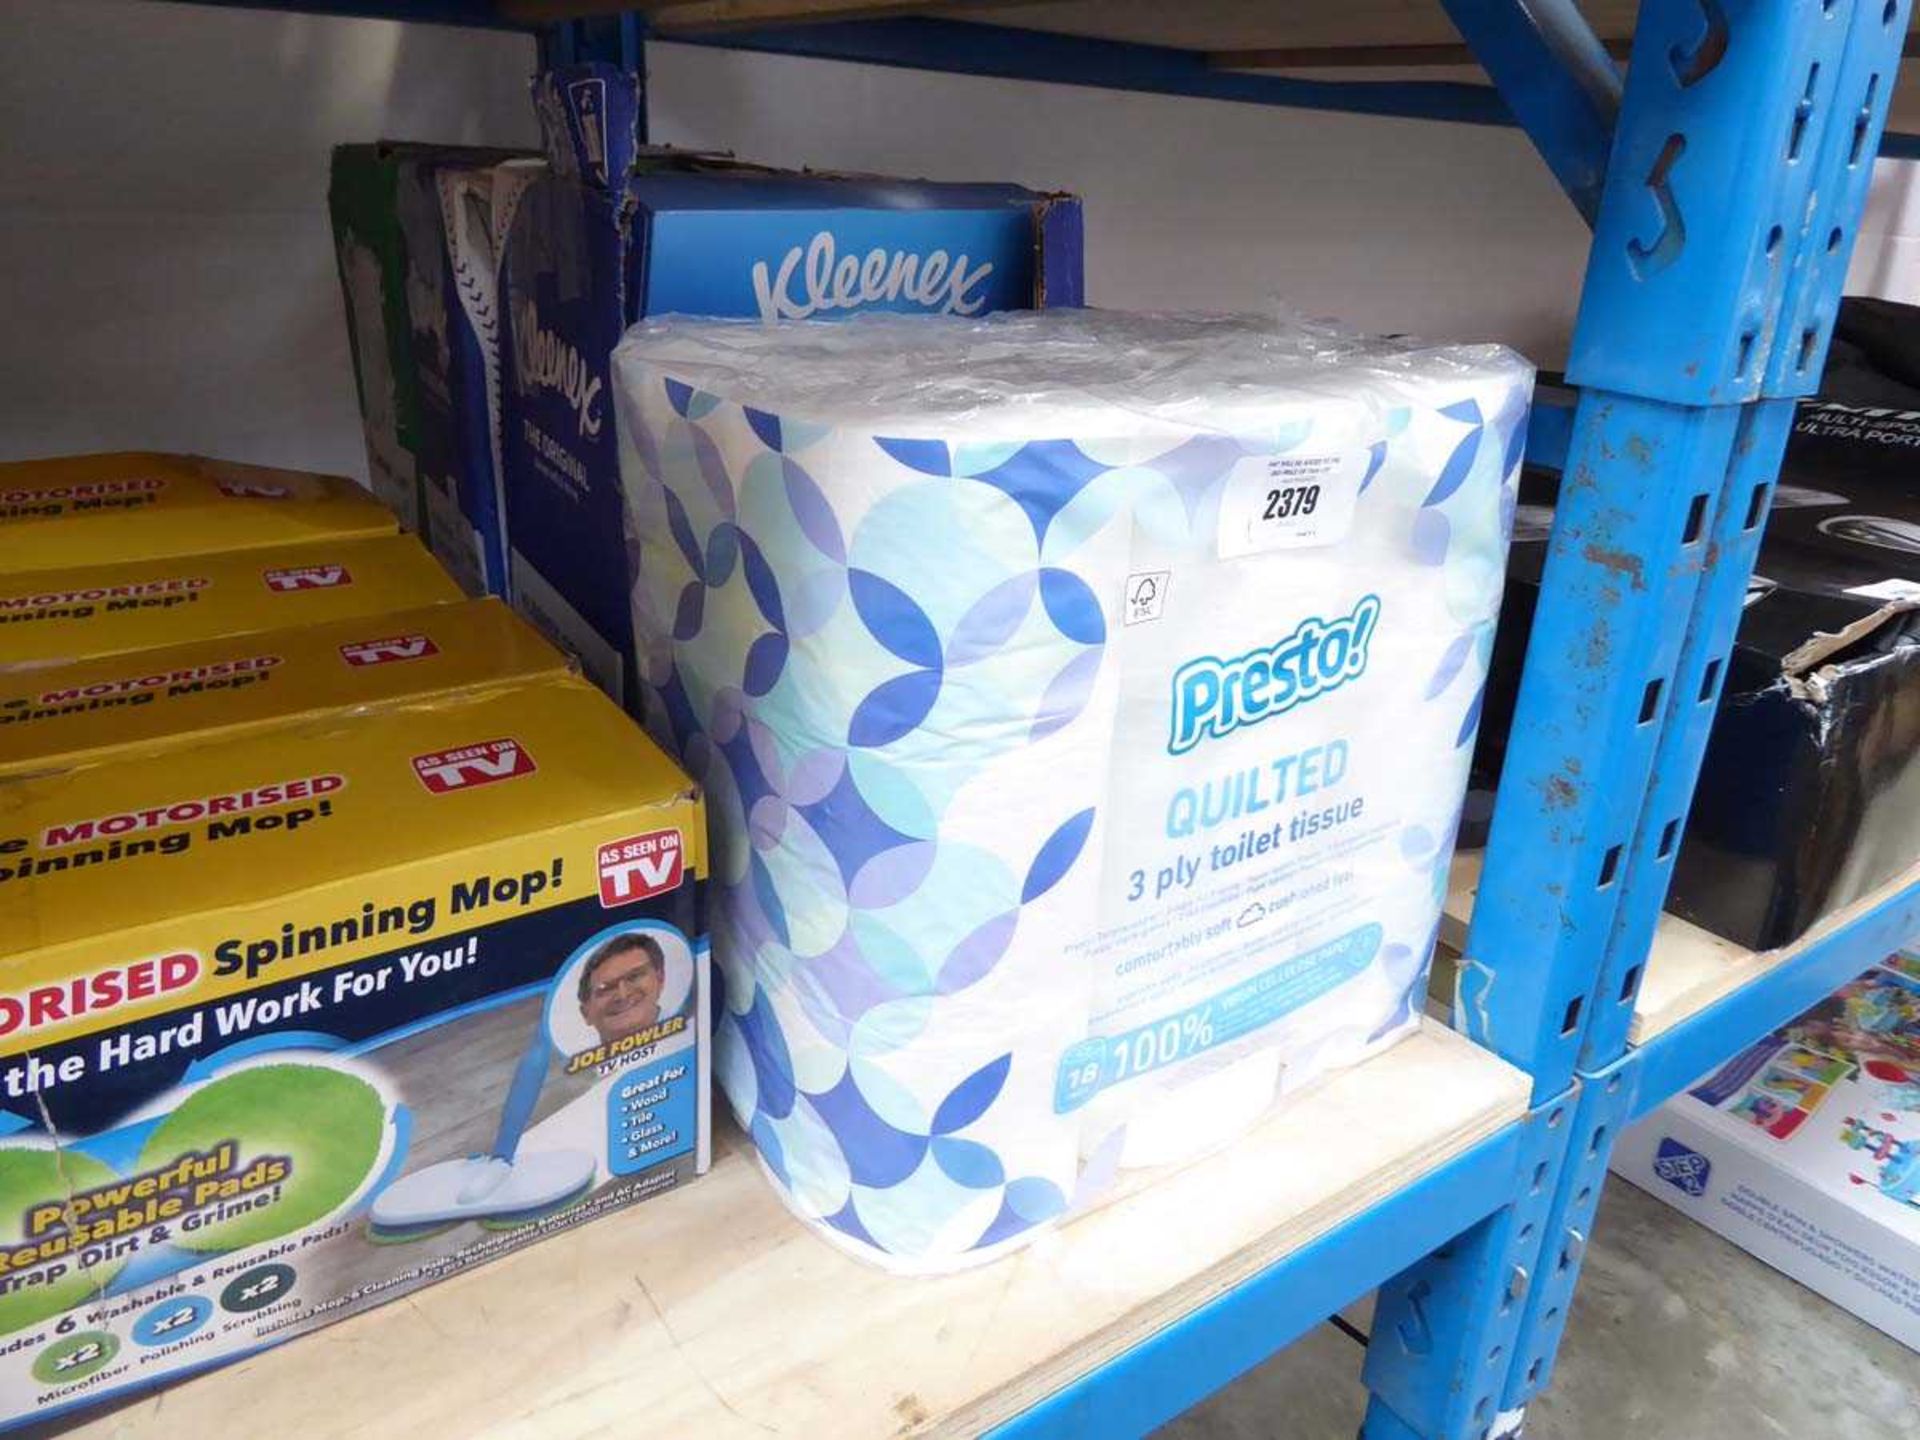 +VAT Quantity of mixed tissue incl. 3 boxes of Kleenex hand tissues and pack of 18 rolls of Presto 3